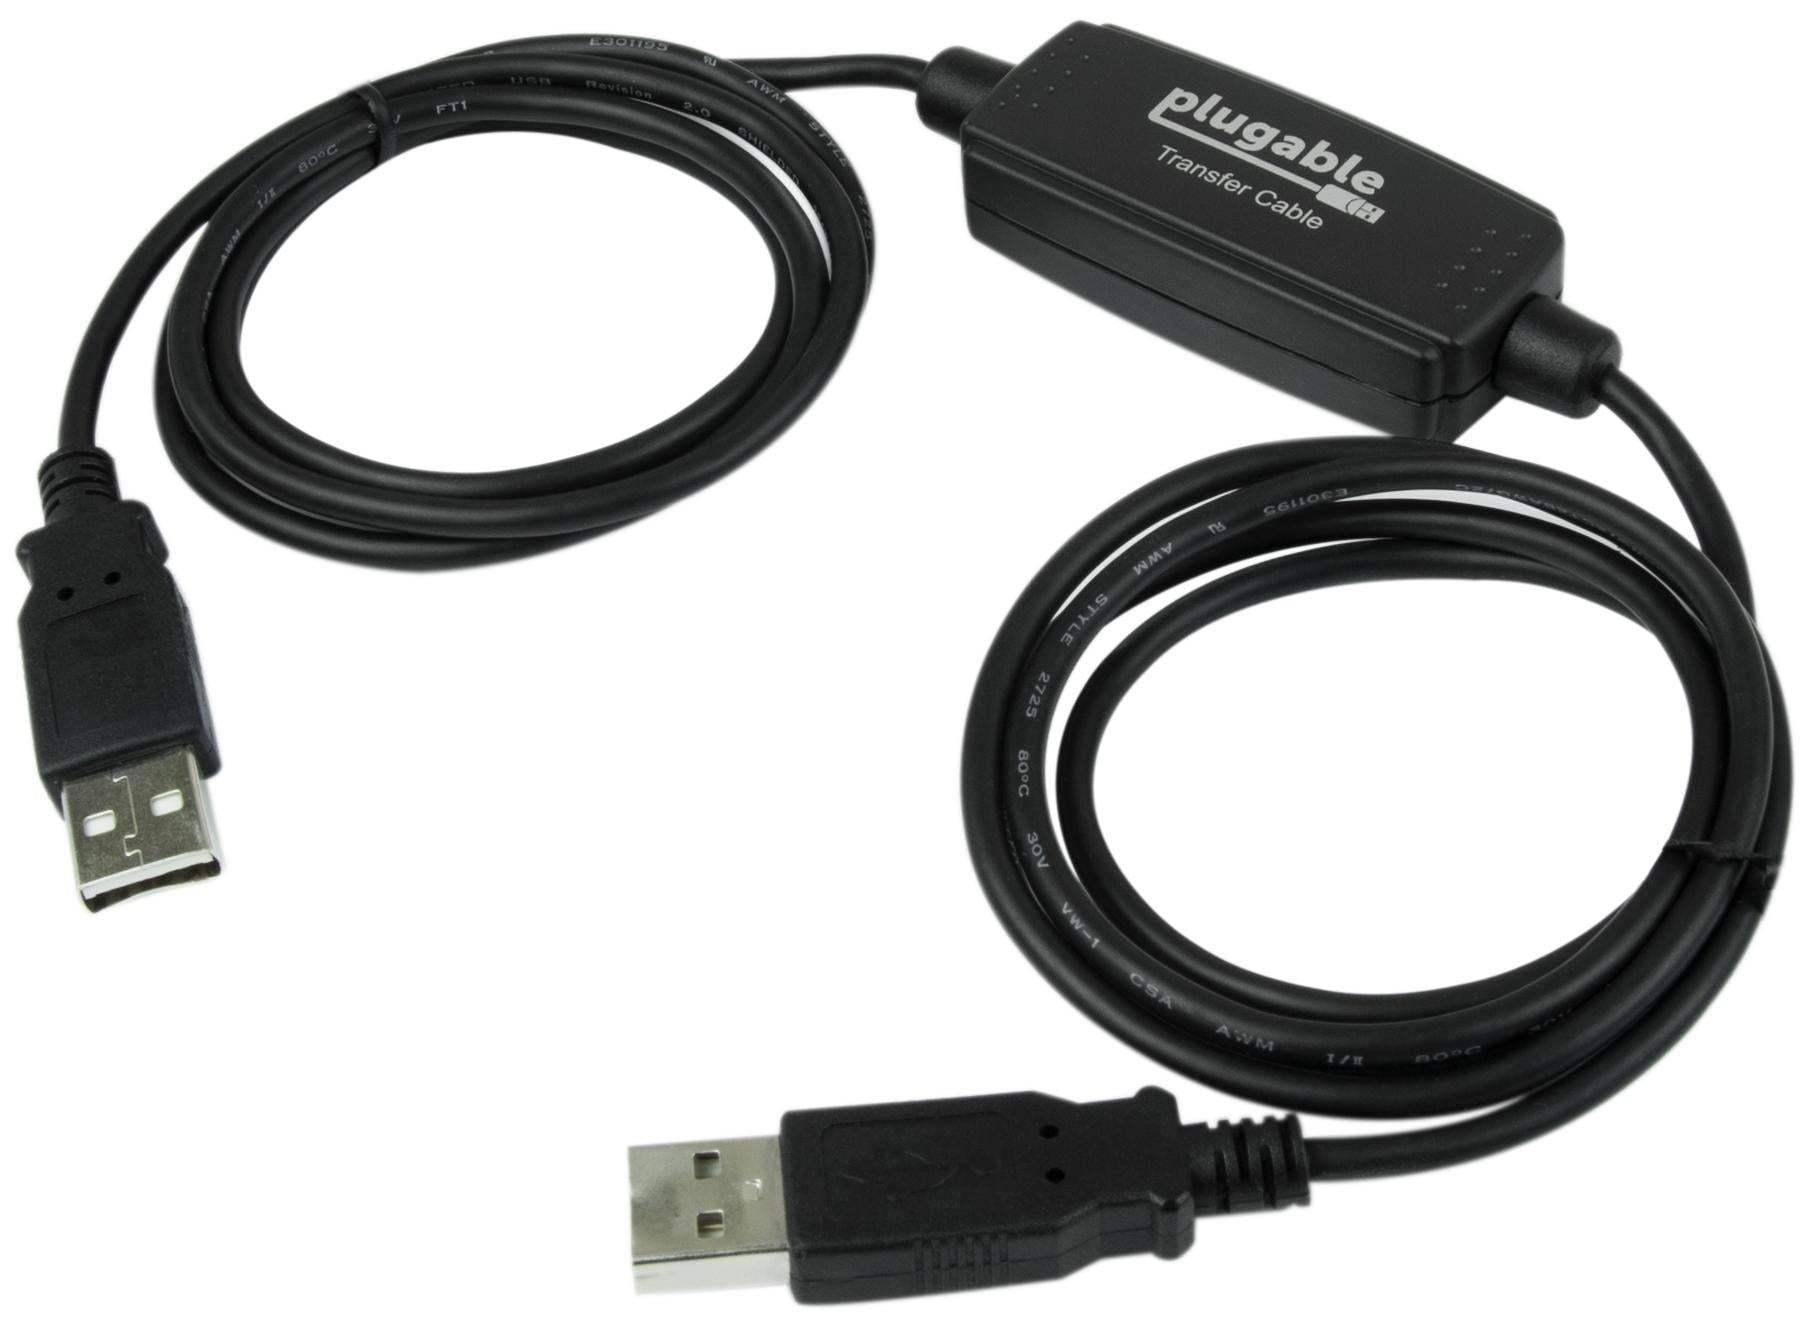 External Separate Interface Cable Expansion Dual-Port USB 2.0